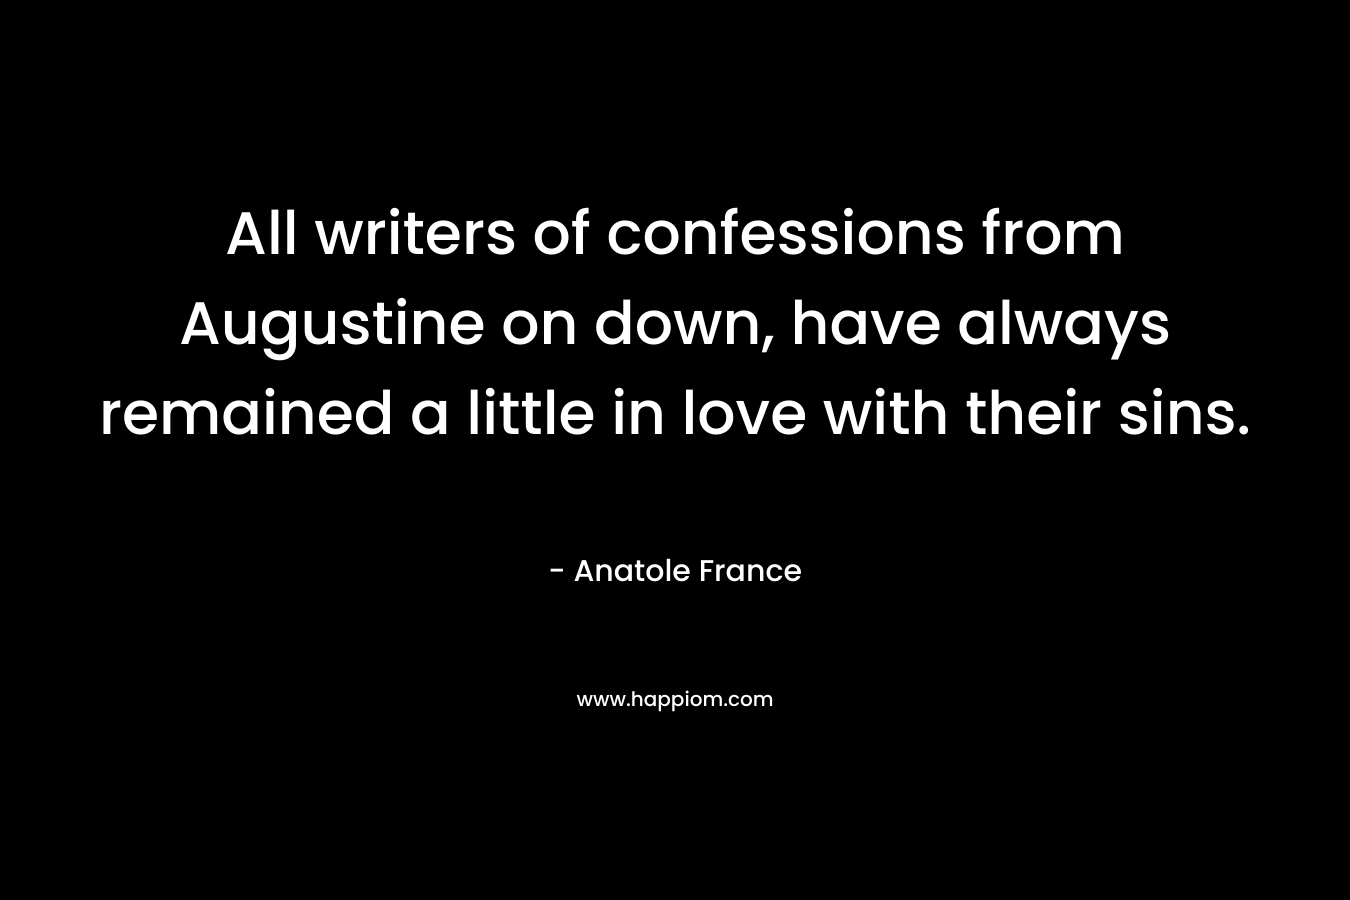 All writers of confessions from Augustine on down, have always remained a little in love with their sins. – Anatole France